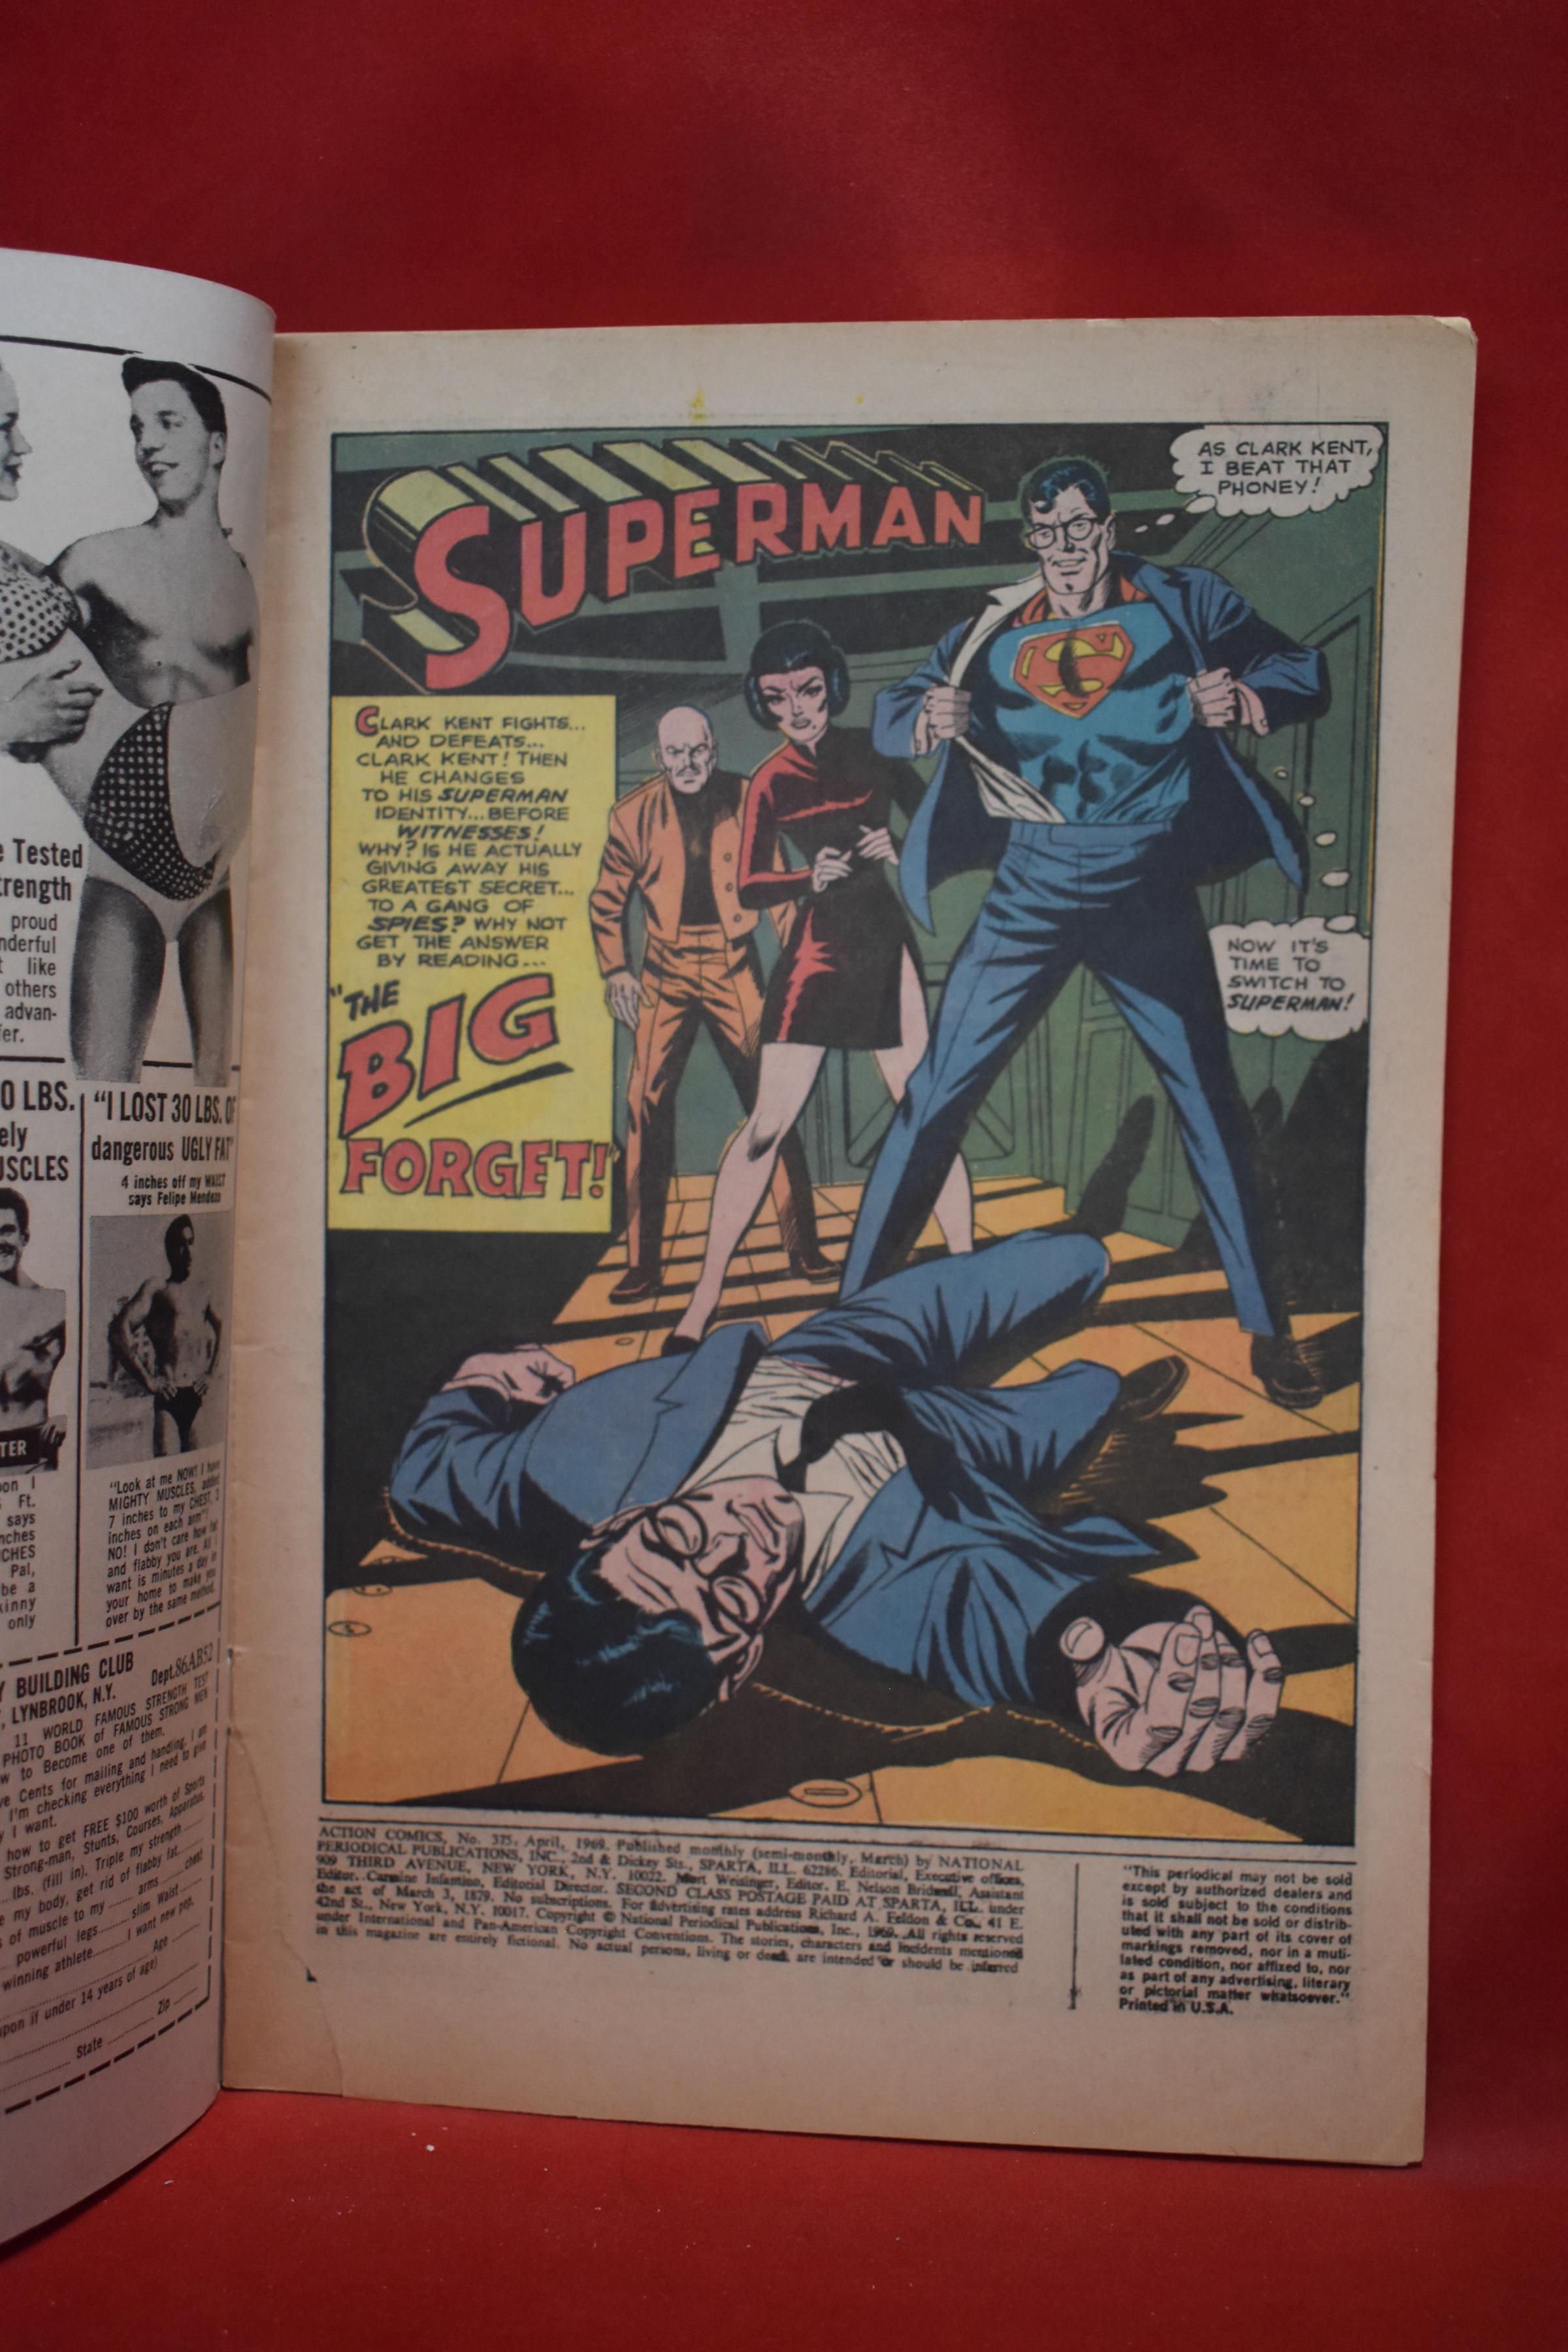 ACTION COMICS #375 | THE BIG FORGET & THE WOMAN WHO HATED SUPERGIRL - CURT SWAN - 1969